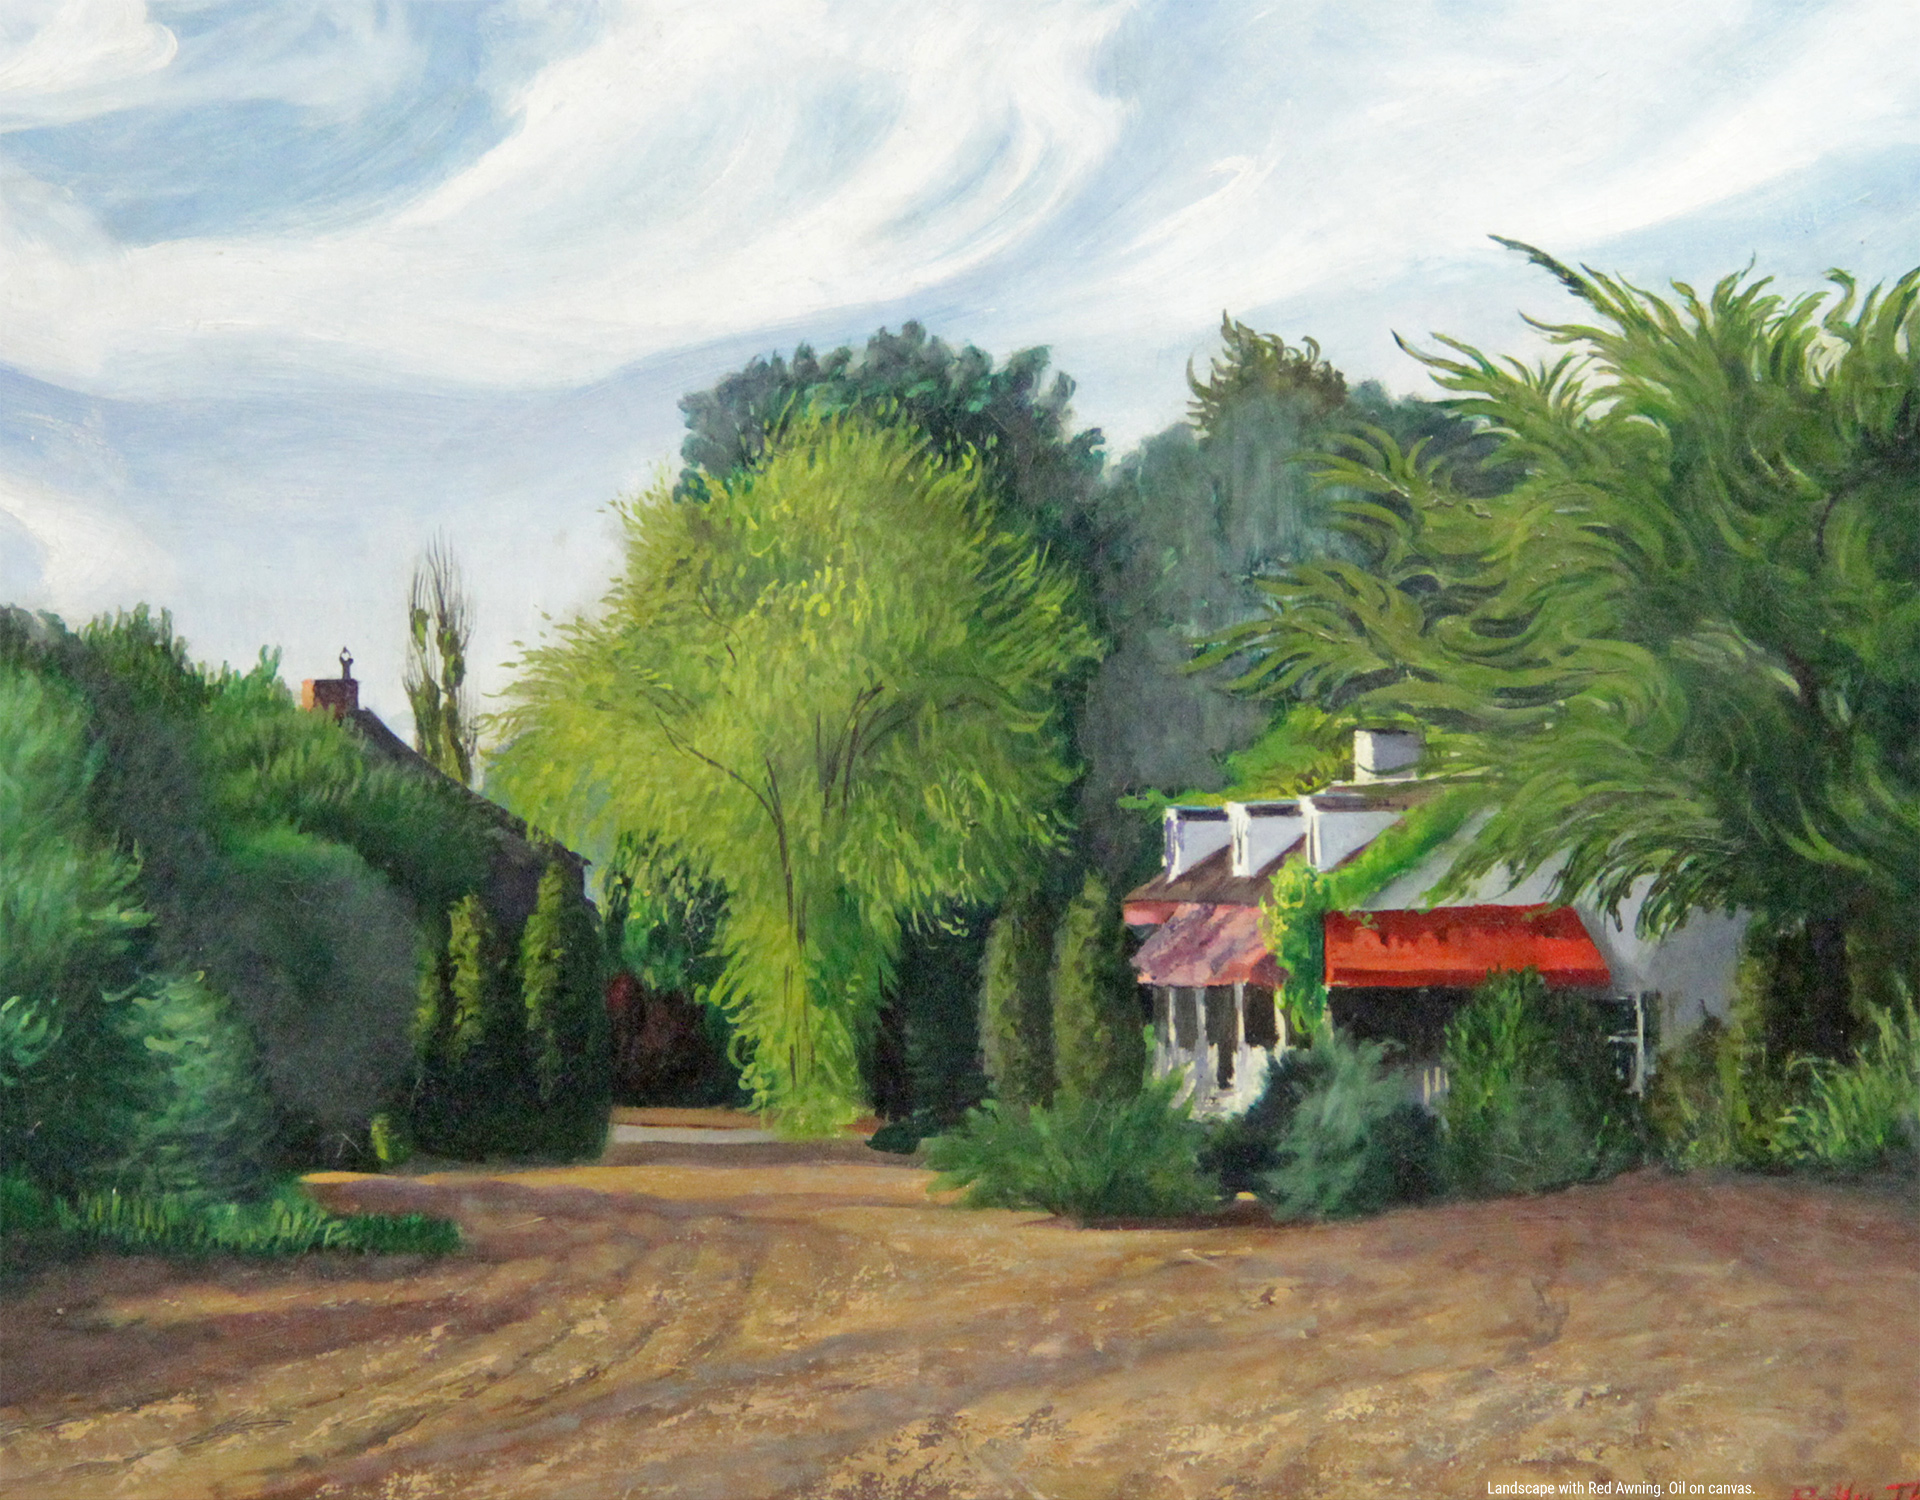 Landscape with Red Awning. Oil on canvas.